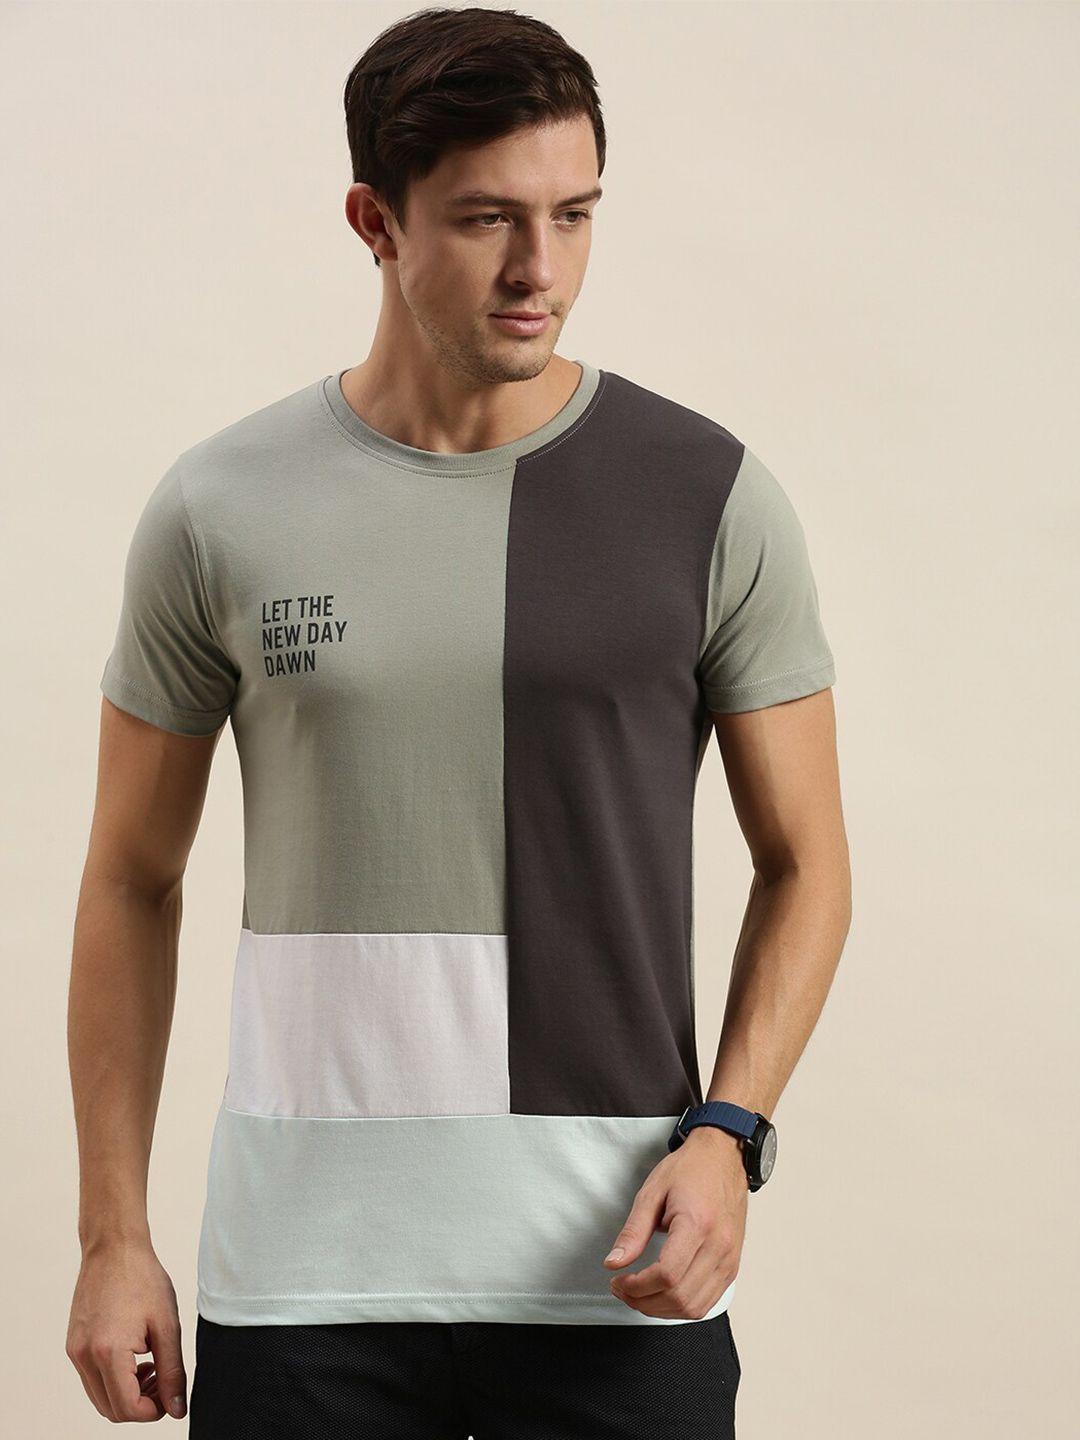 difference of opinion men grey typography pockets t-shirt